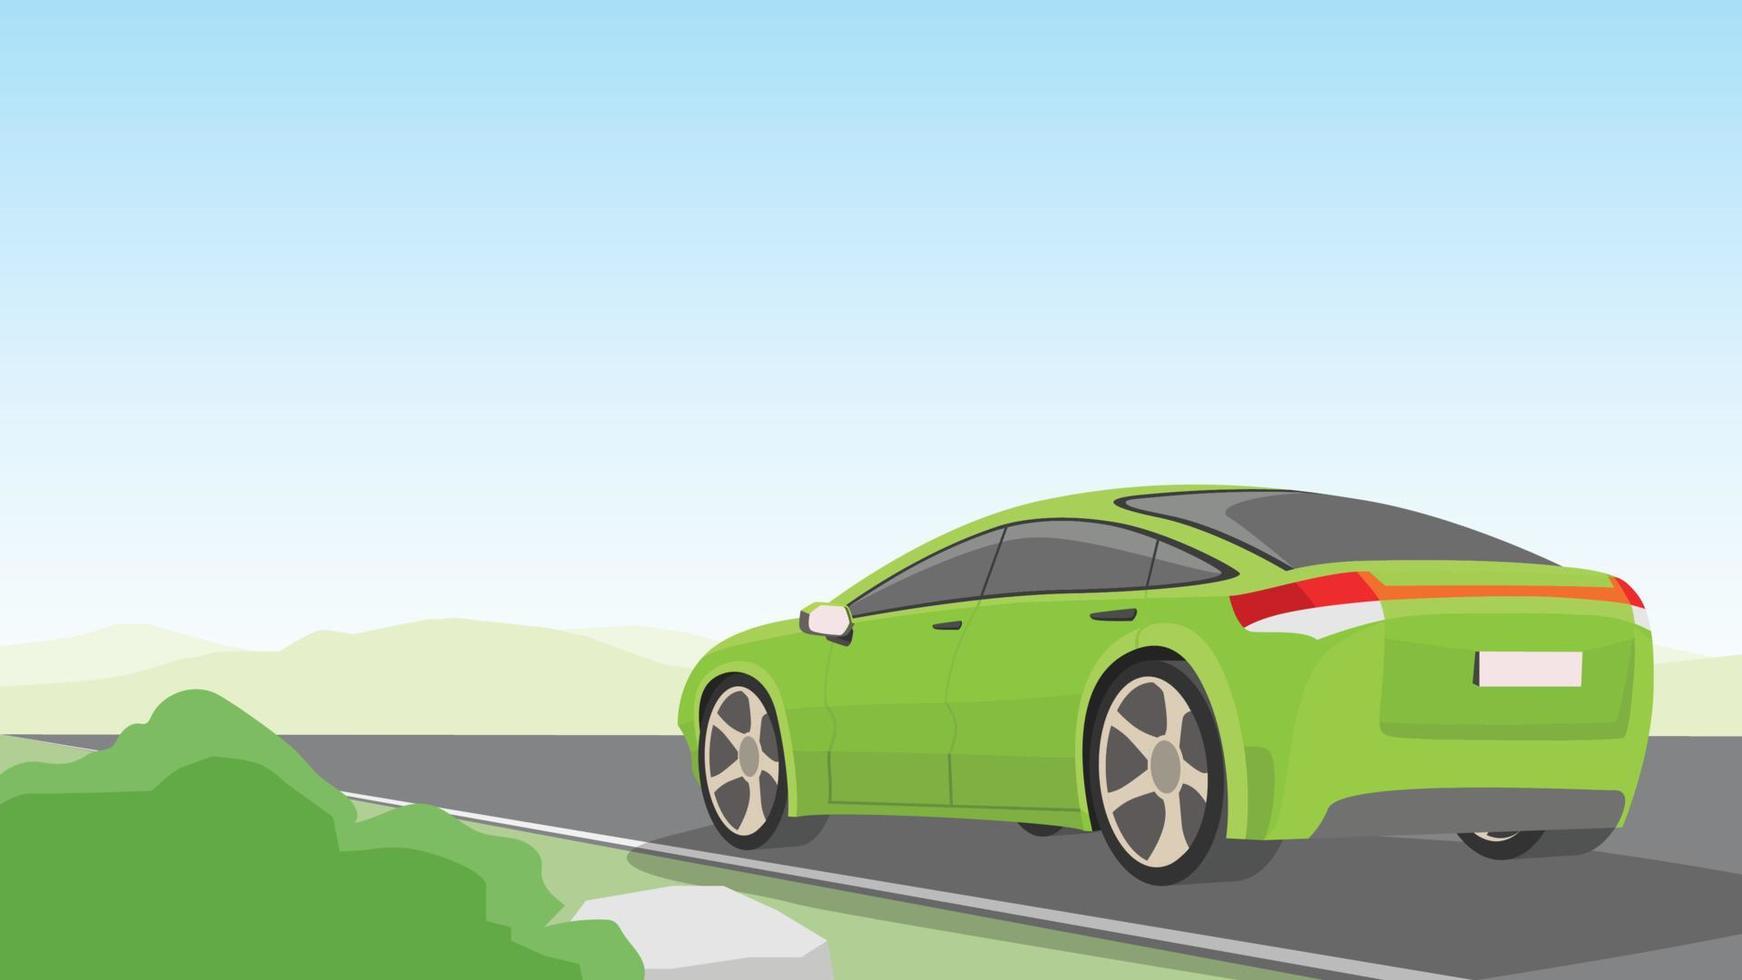 Vector cartoon landscape of asphalt road on wide open field. Green passenger car drives forward. Background of mountains under blue sky with free space. and separate layers.